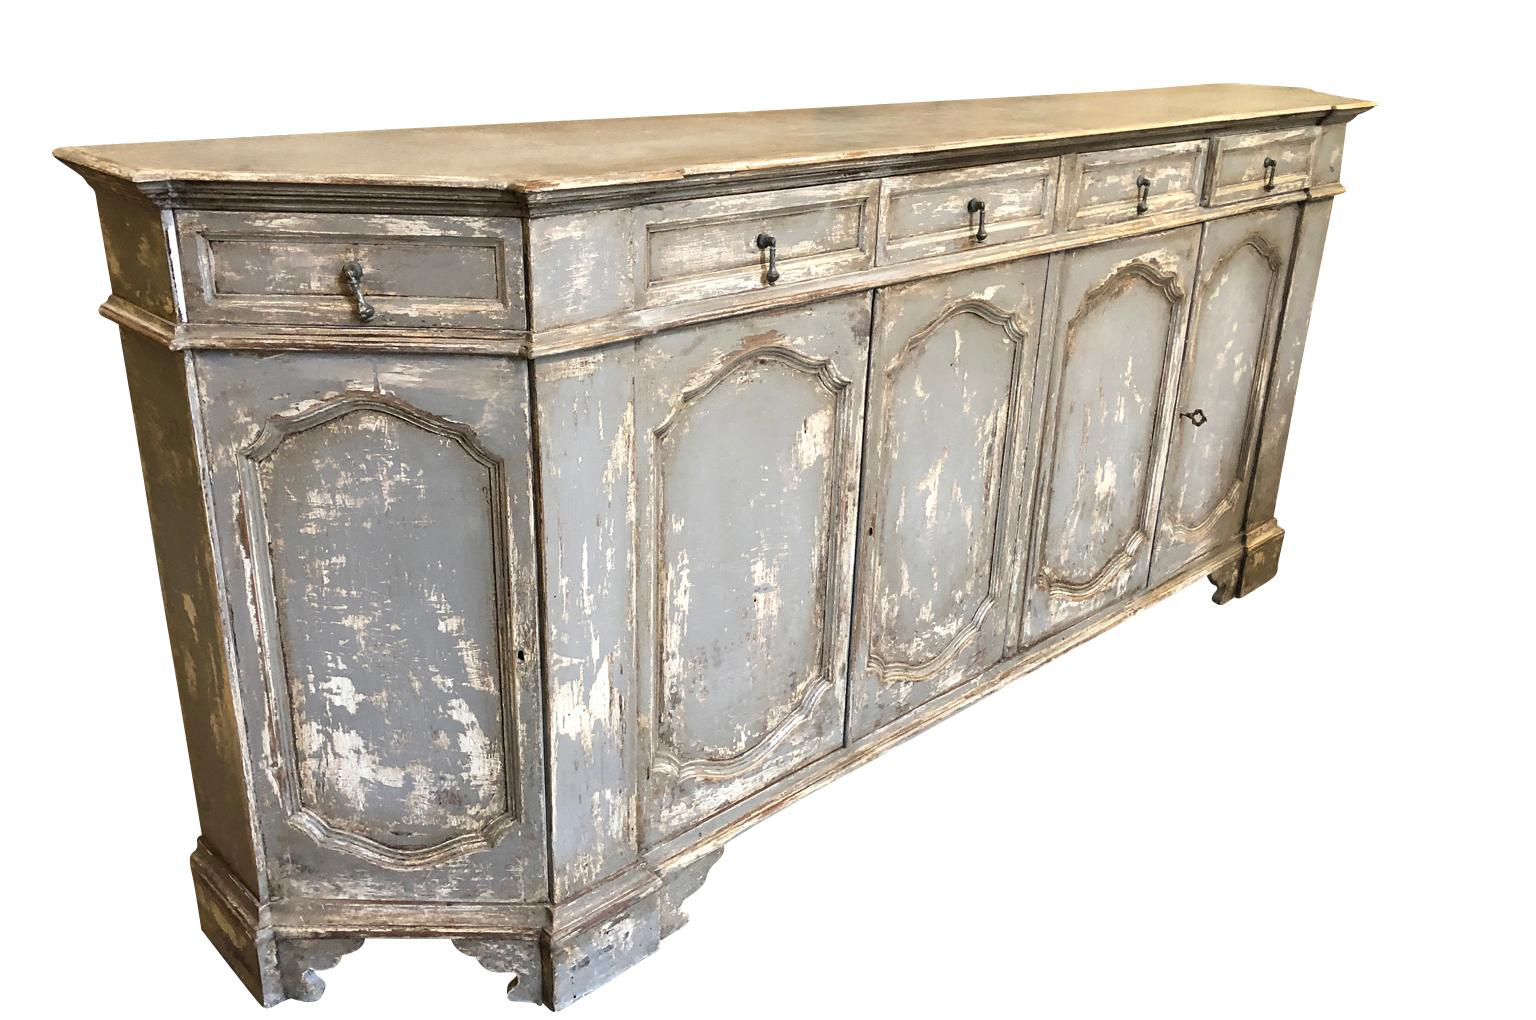 A very lovely later 19th century Italian credenza in painted wood. Soundly constructed with 6 doors and 6 drawers with a wonderfully sculpted form. A terrific storage piece.